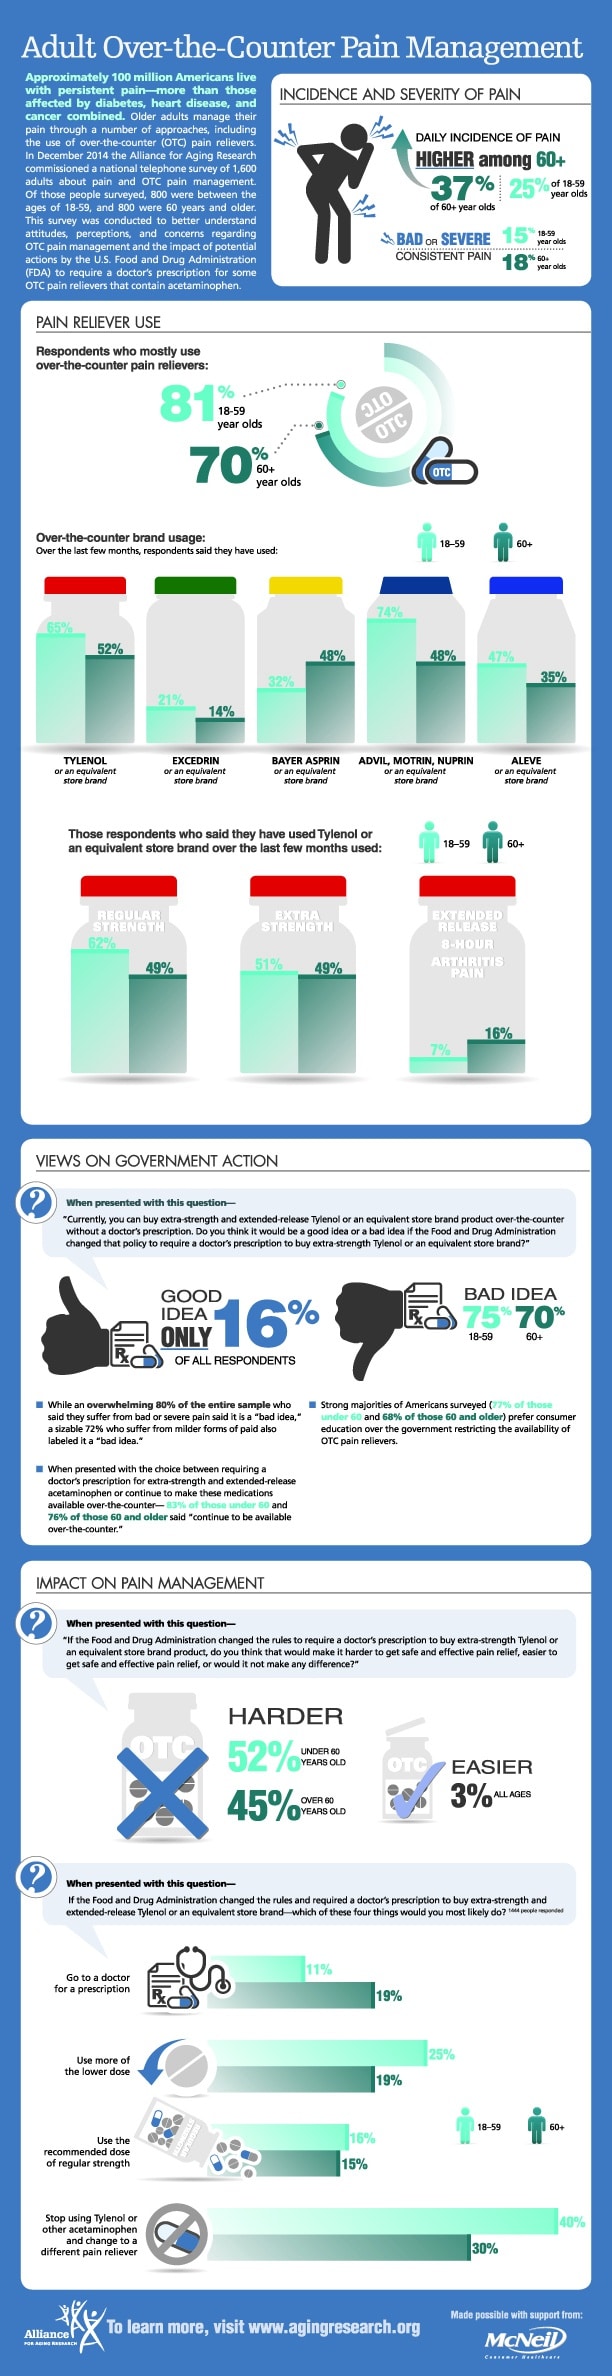 Infographic on adult over-the-counter pain management